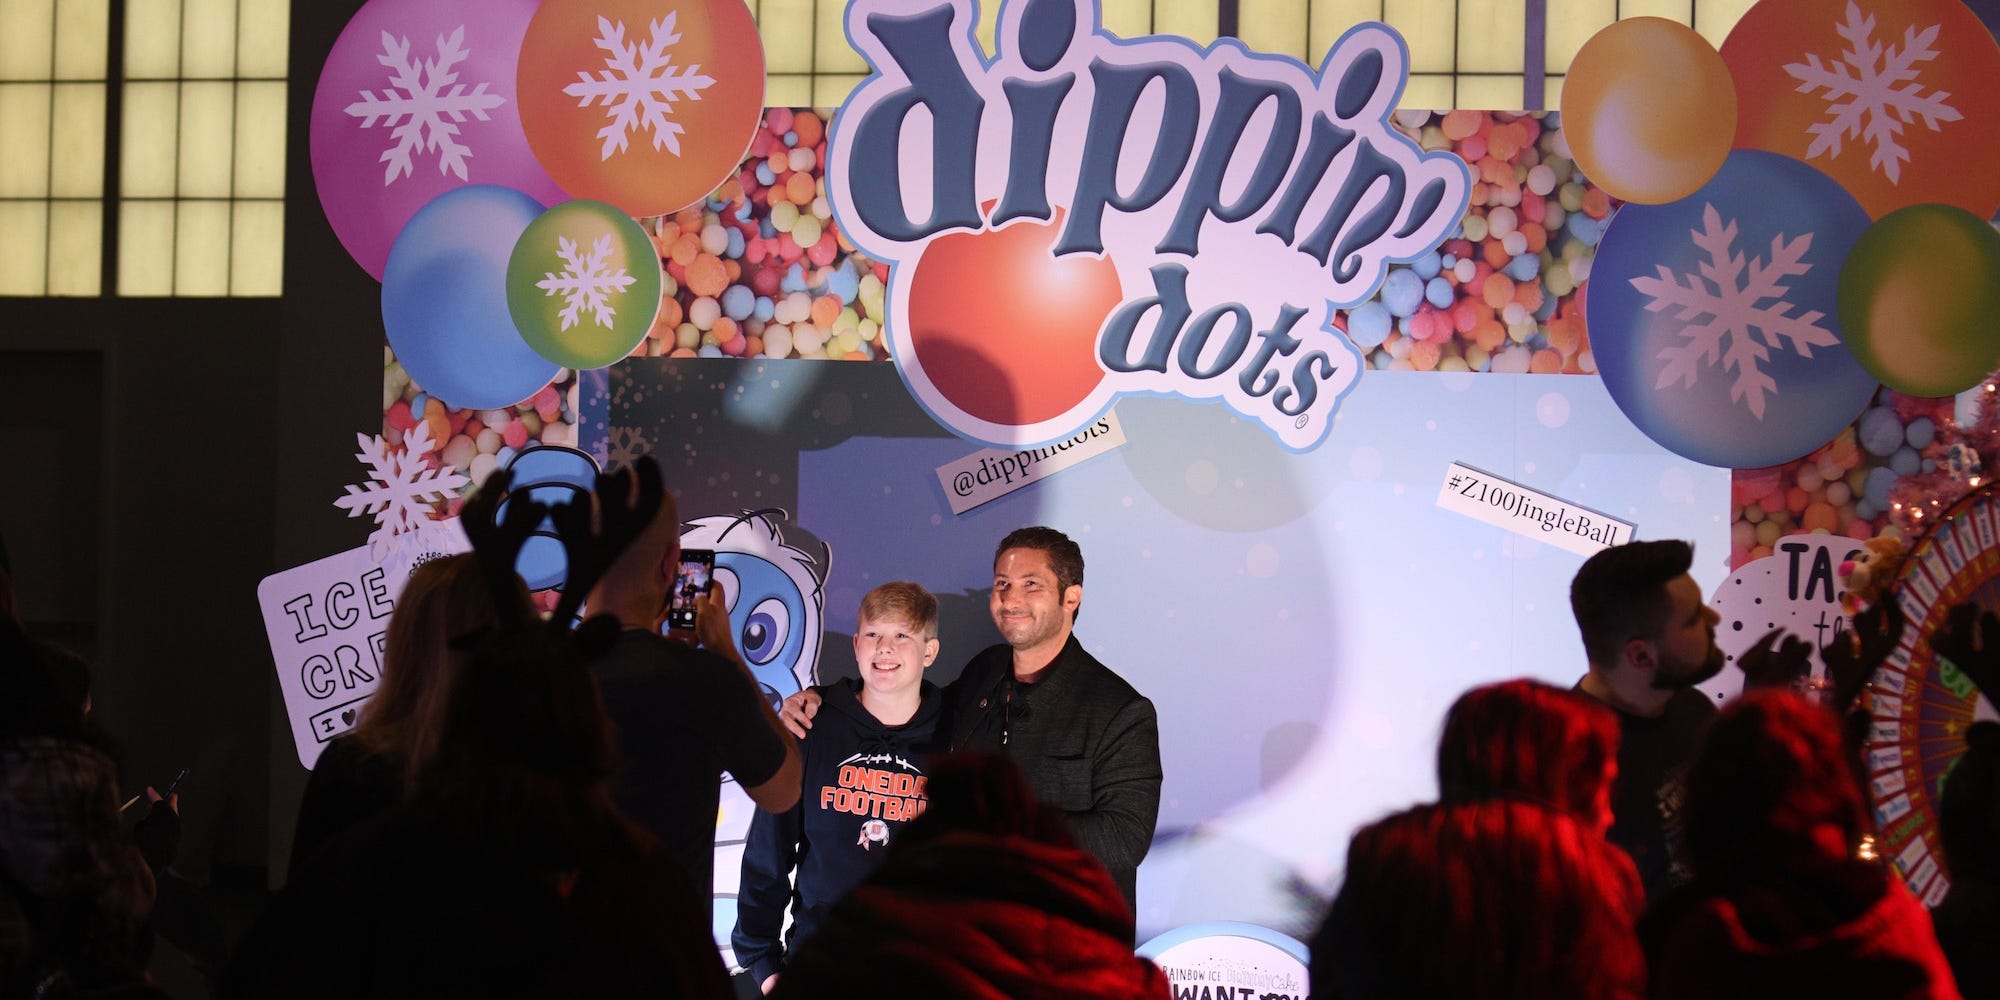 Dippin' Dots CEO Scott Fischer poses with fans at a 2019 event in front of the company logo